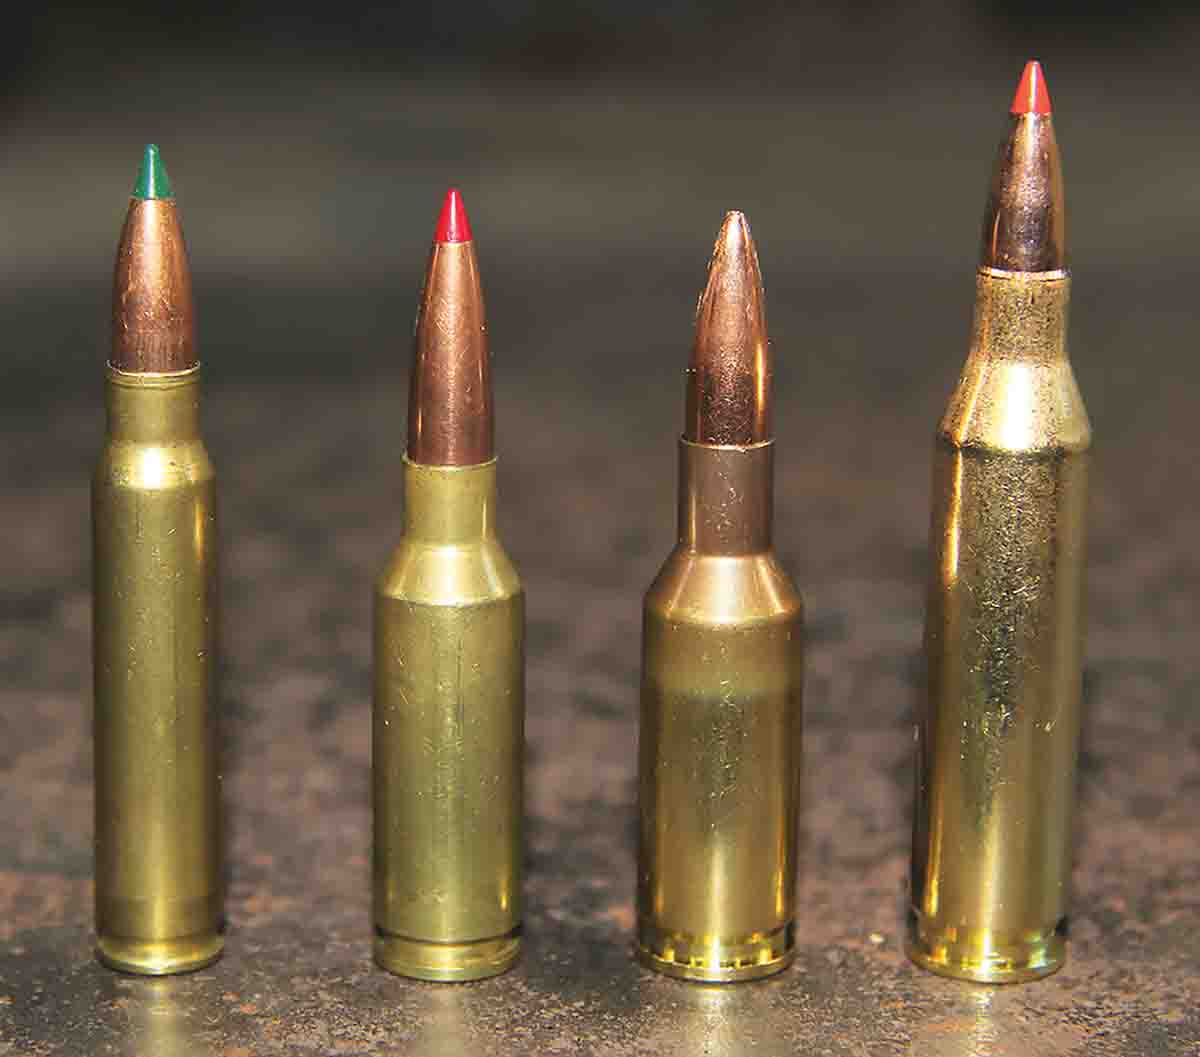 Shown for comparison are (left to right): 6x45mm (6mm/.223 Remington), 6mm ARC, 6mm BR Norma and .243 Winchester.